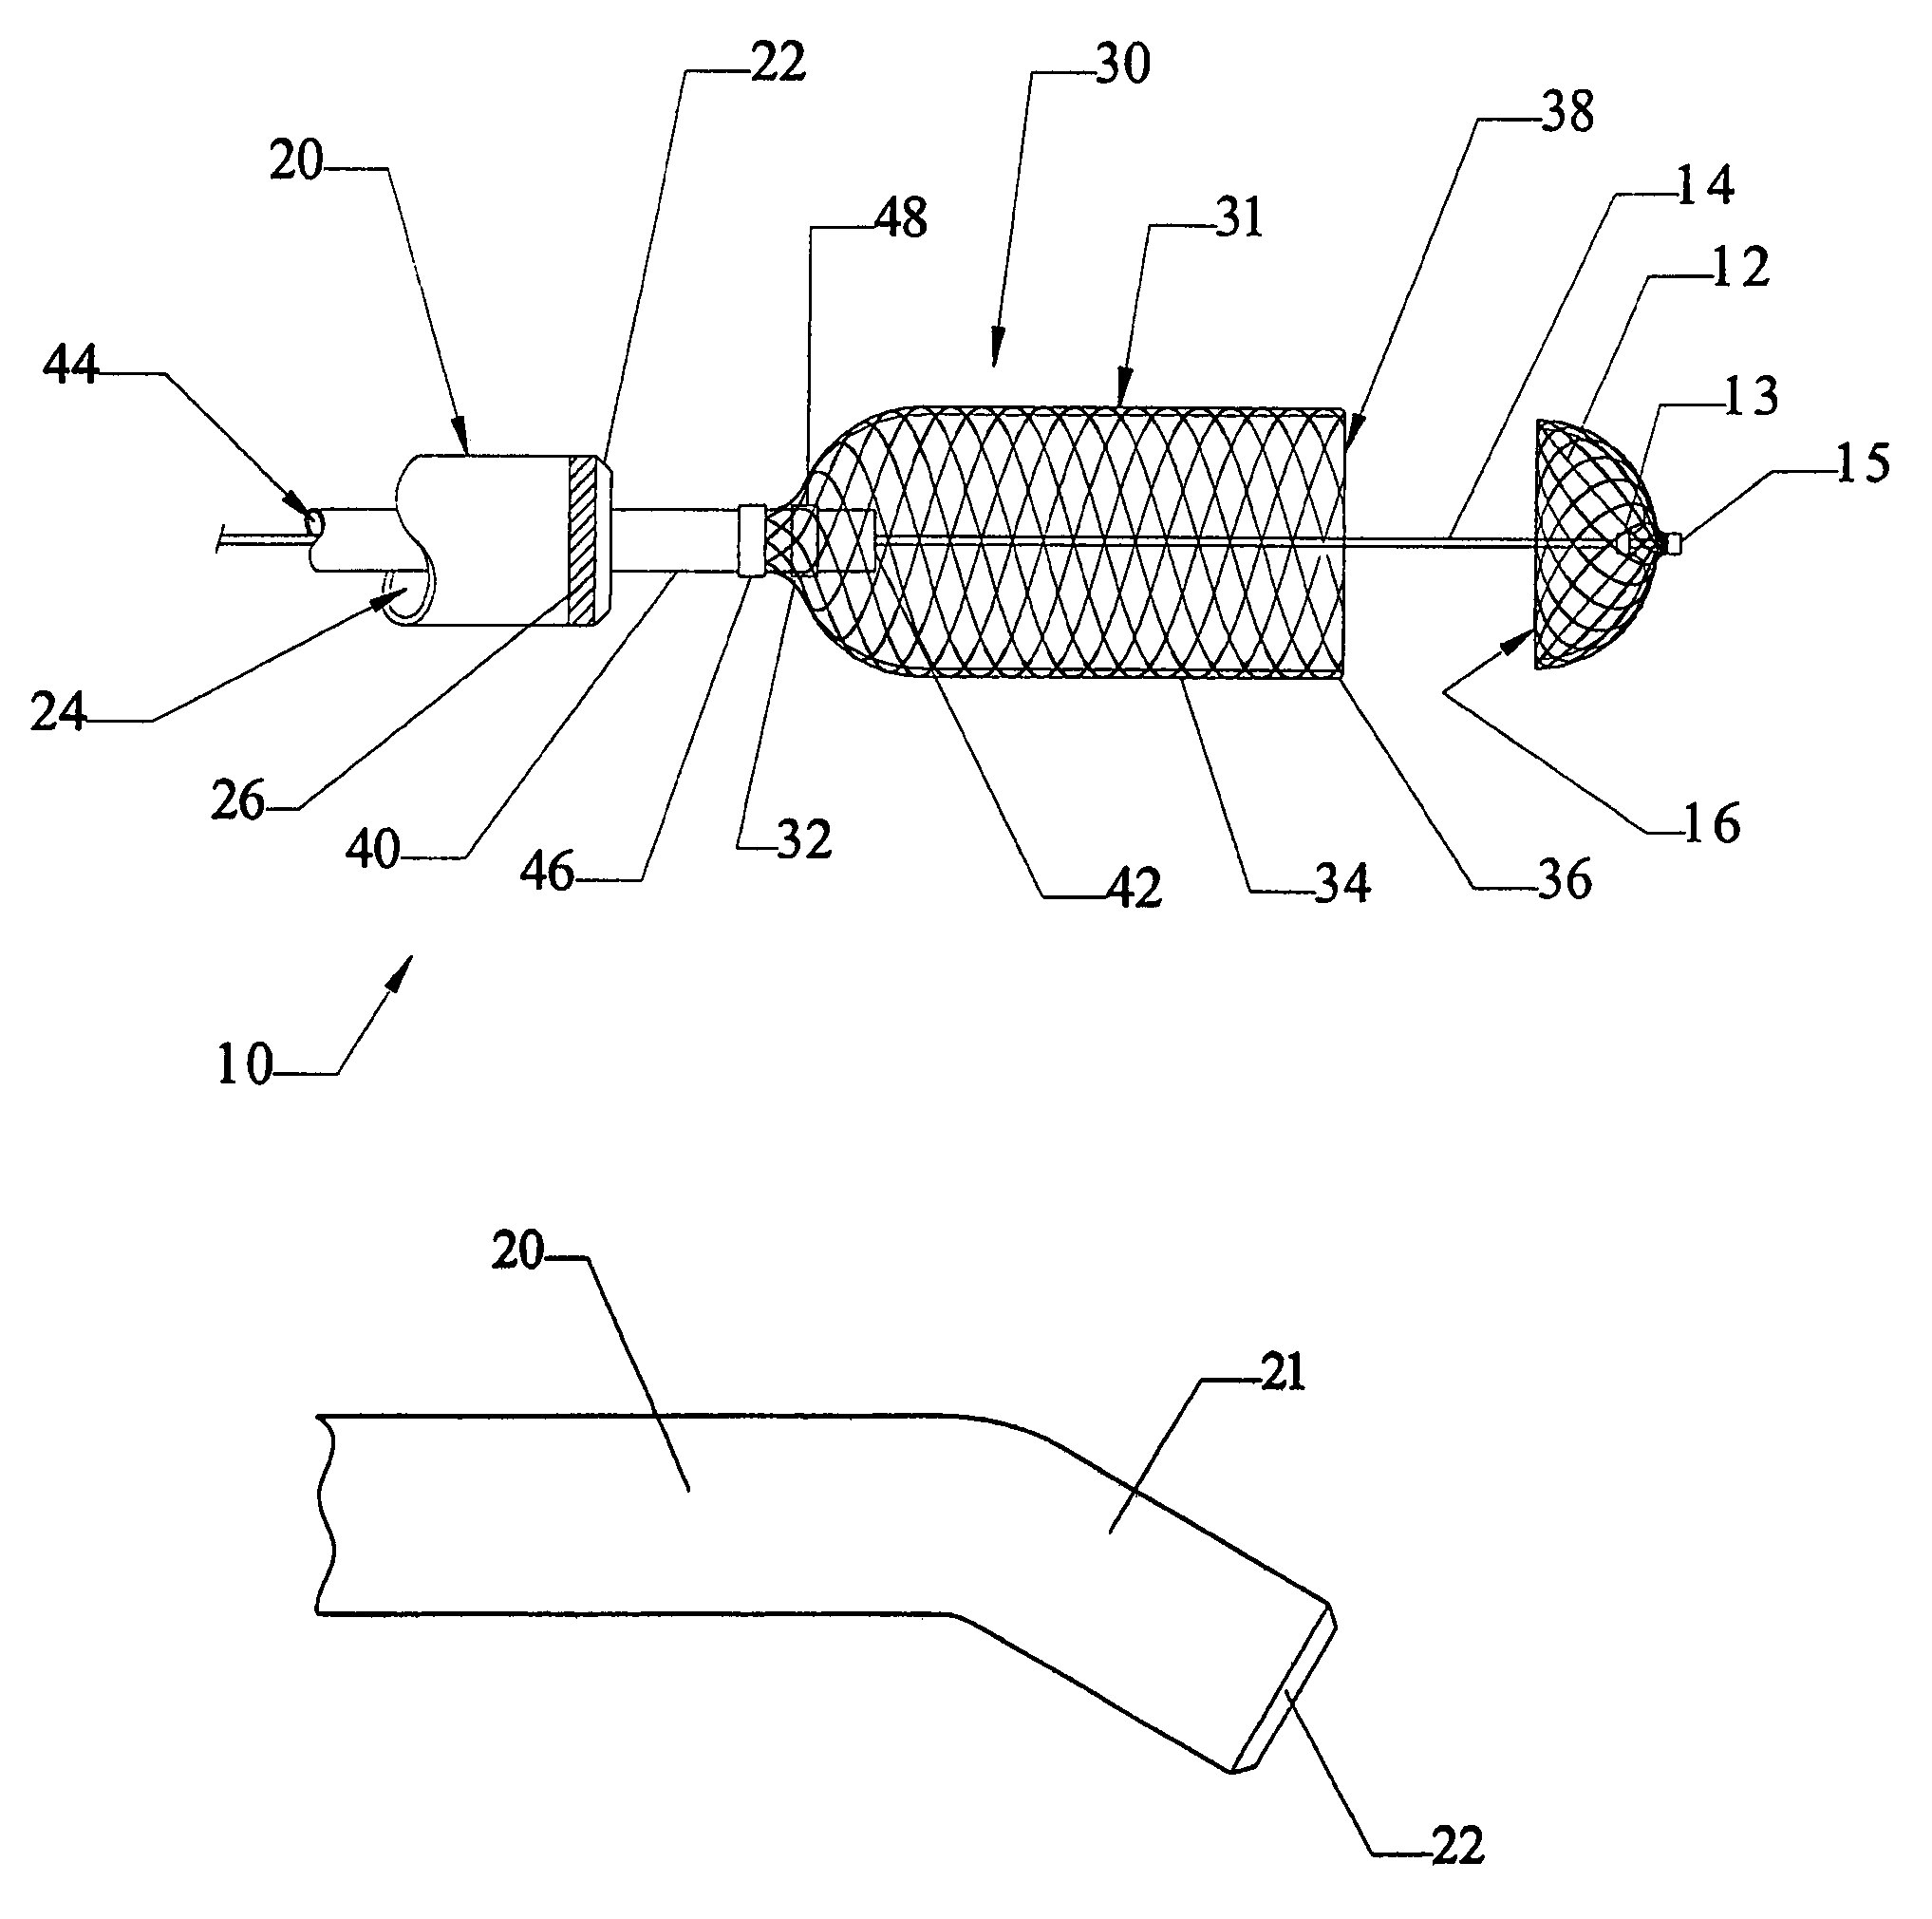 Minimally invasive medical device deployment and retrieval system